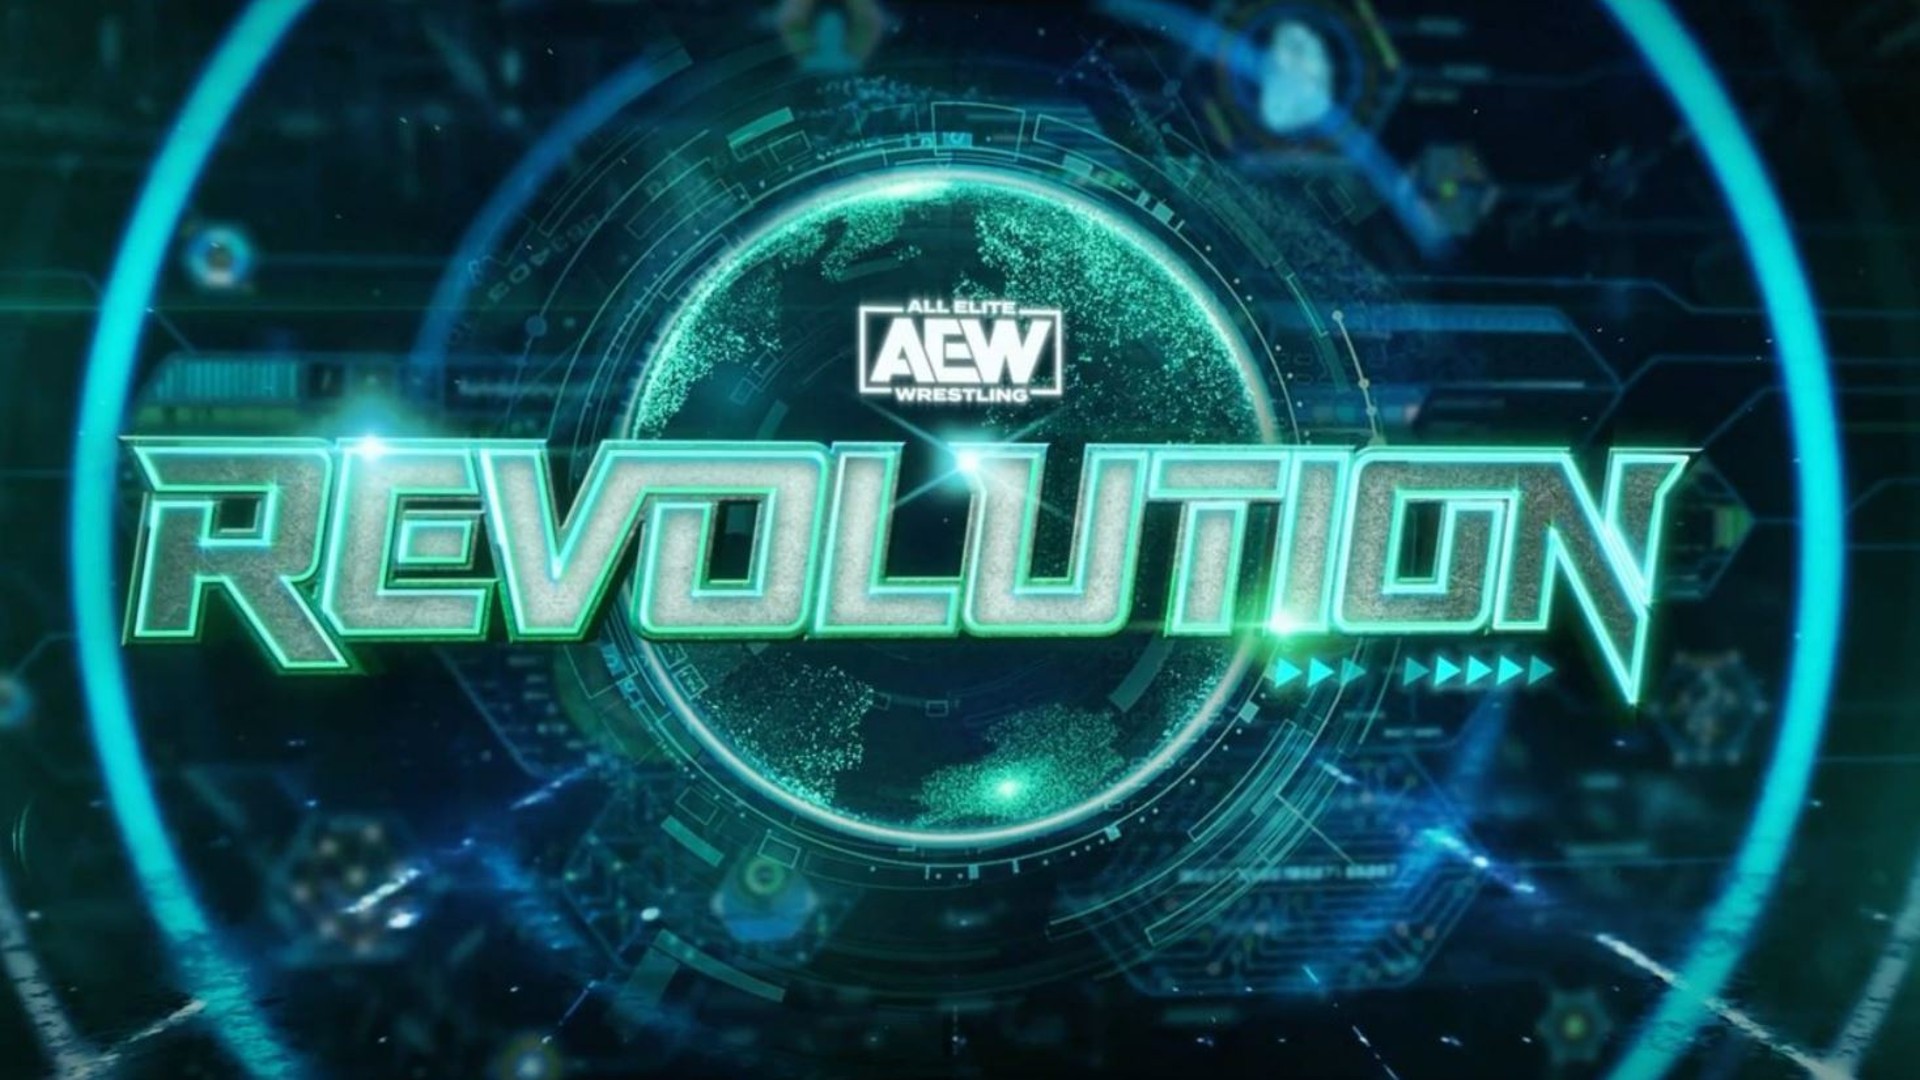 Updated Lineup For AEW Revolution This Sunday